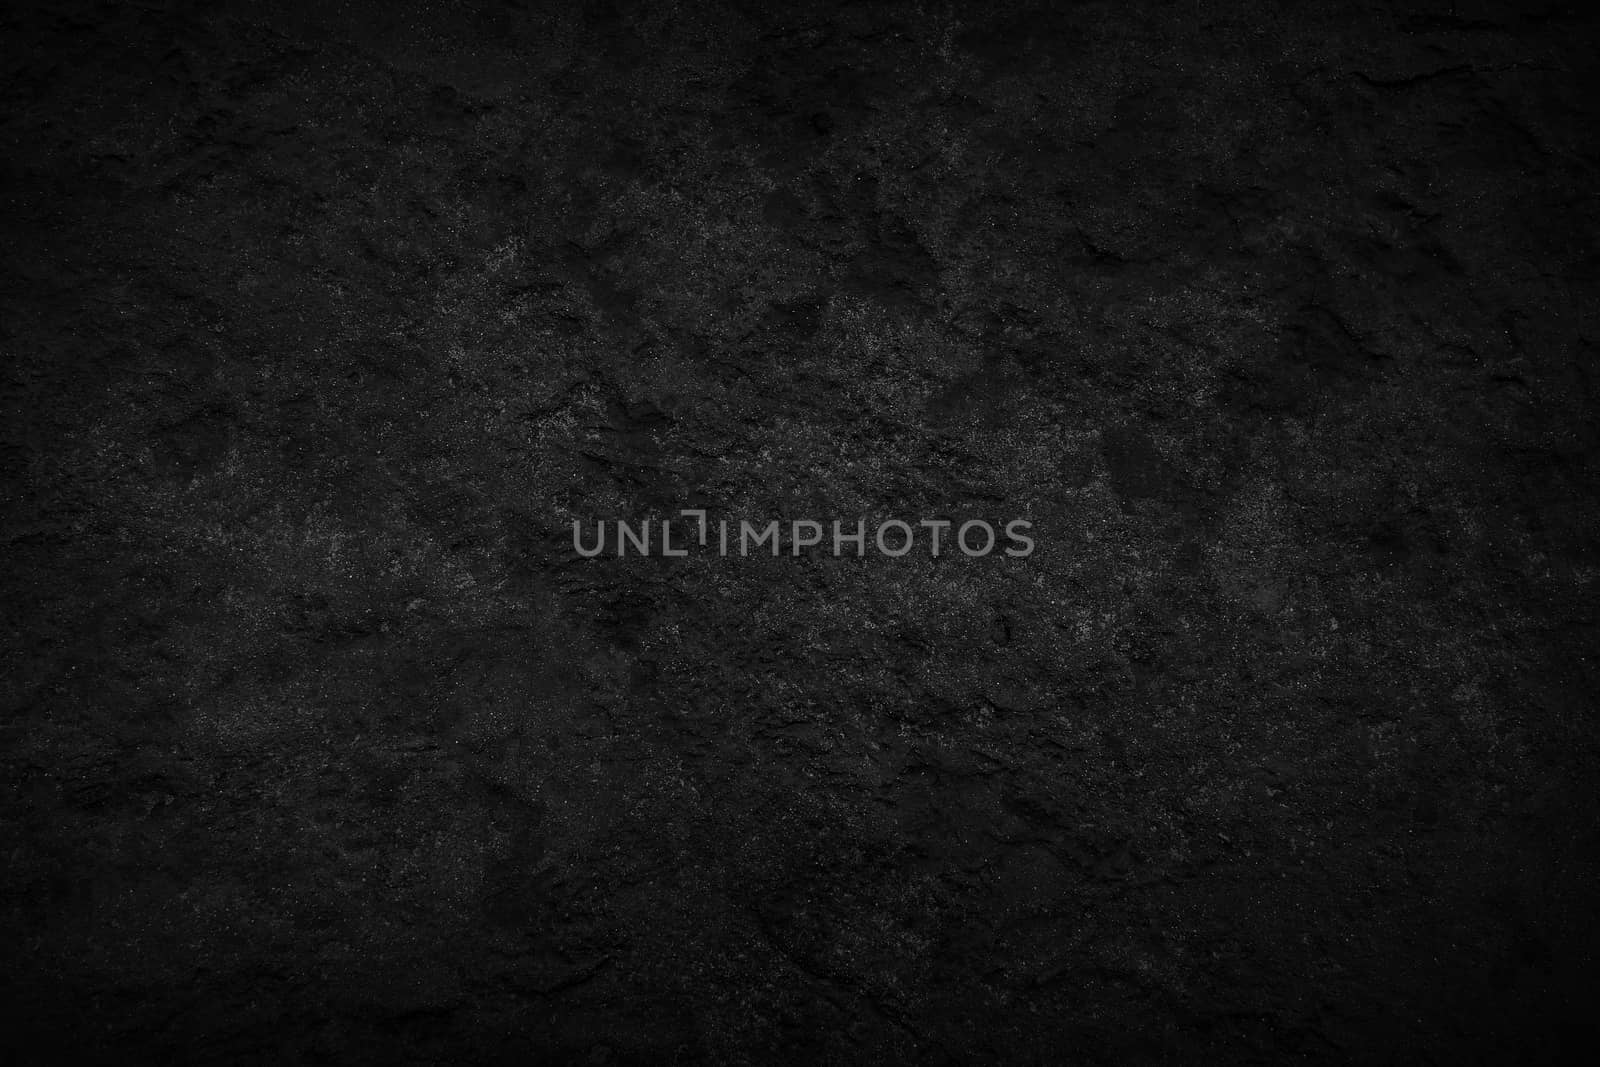 Black cement texture background with copy space